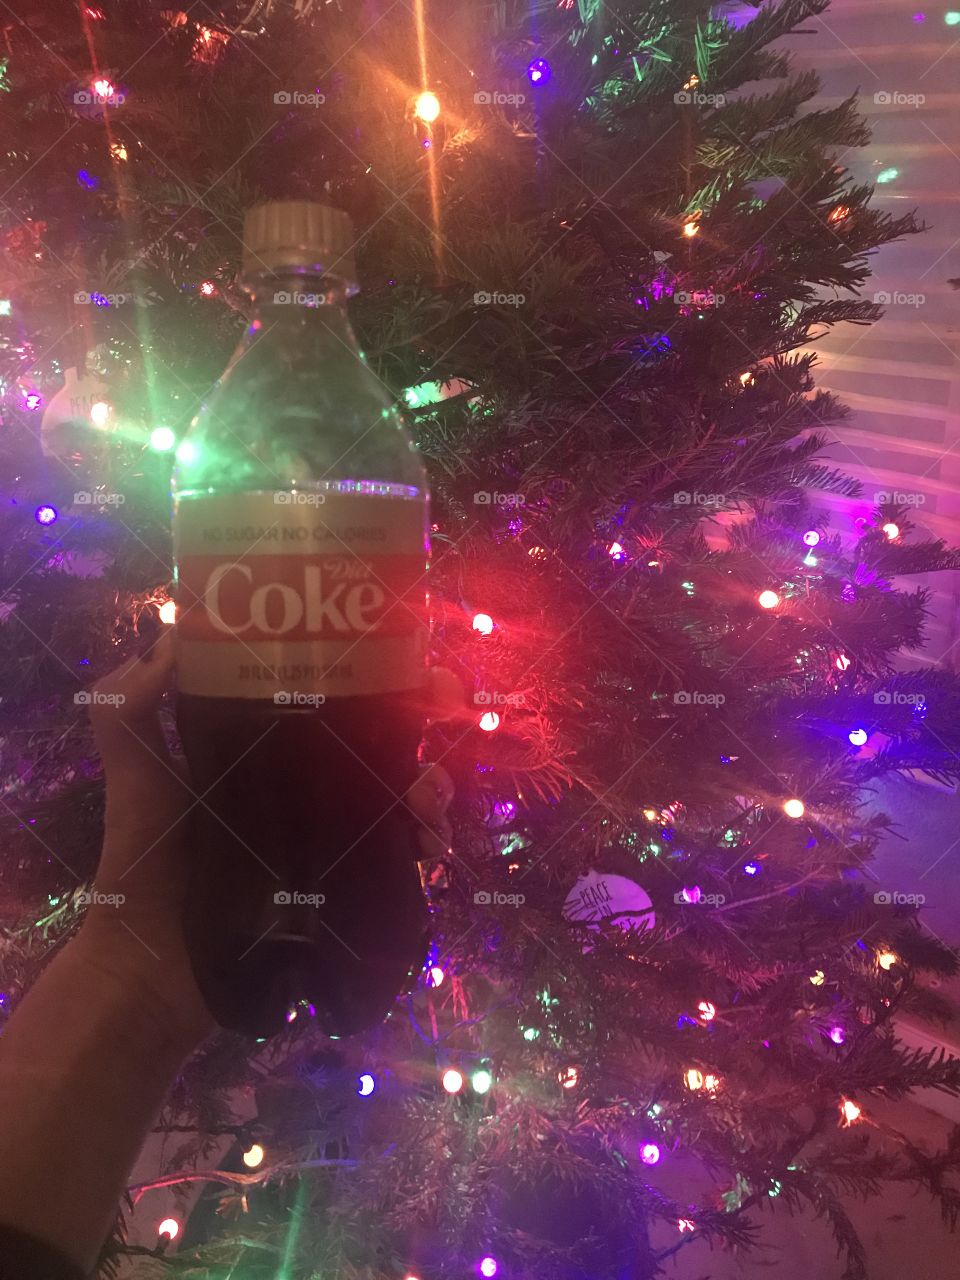 A woman holding a Diet Coke soda drink in front of a brightly lit Christmas tree. USA, America 